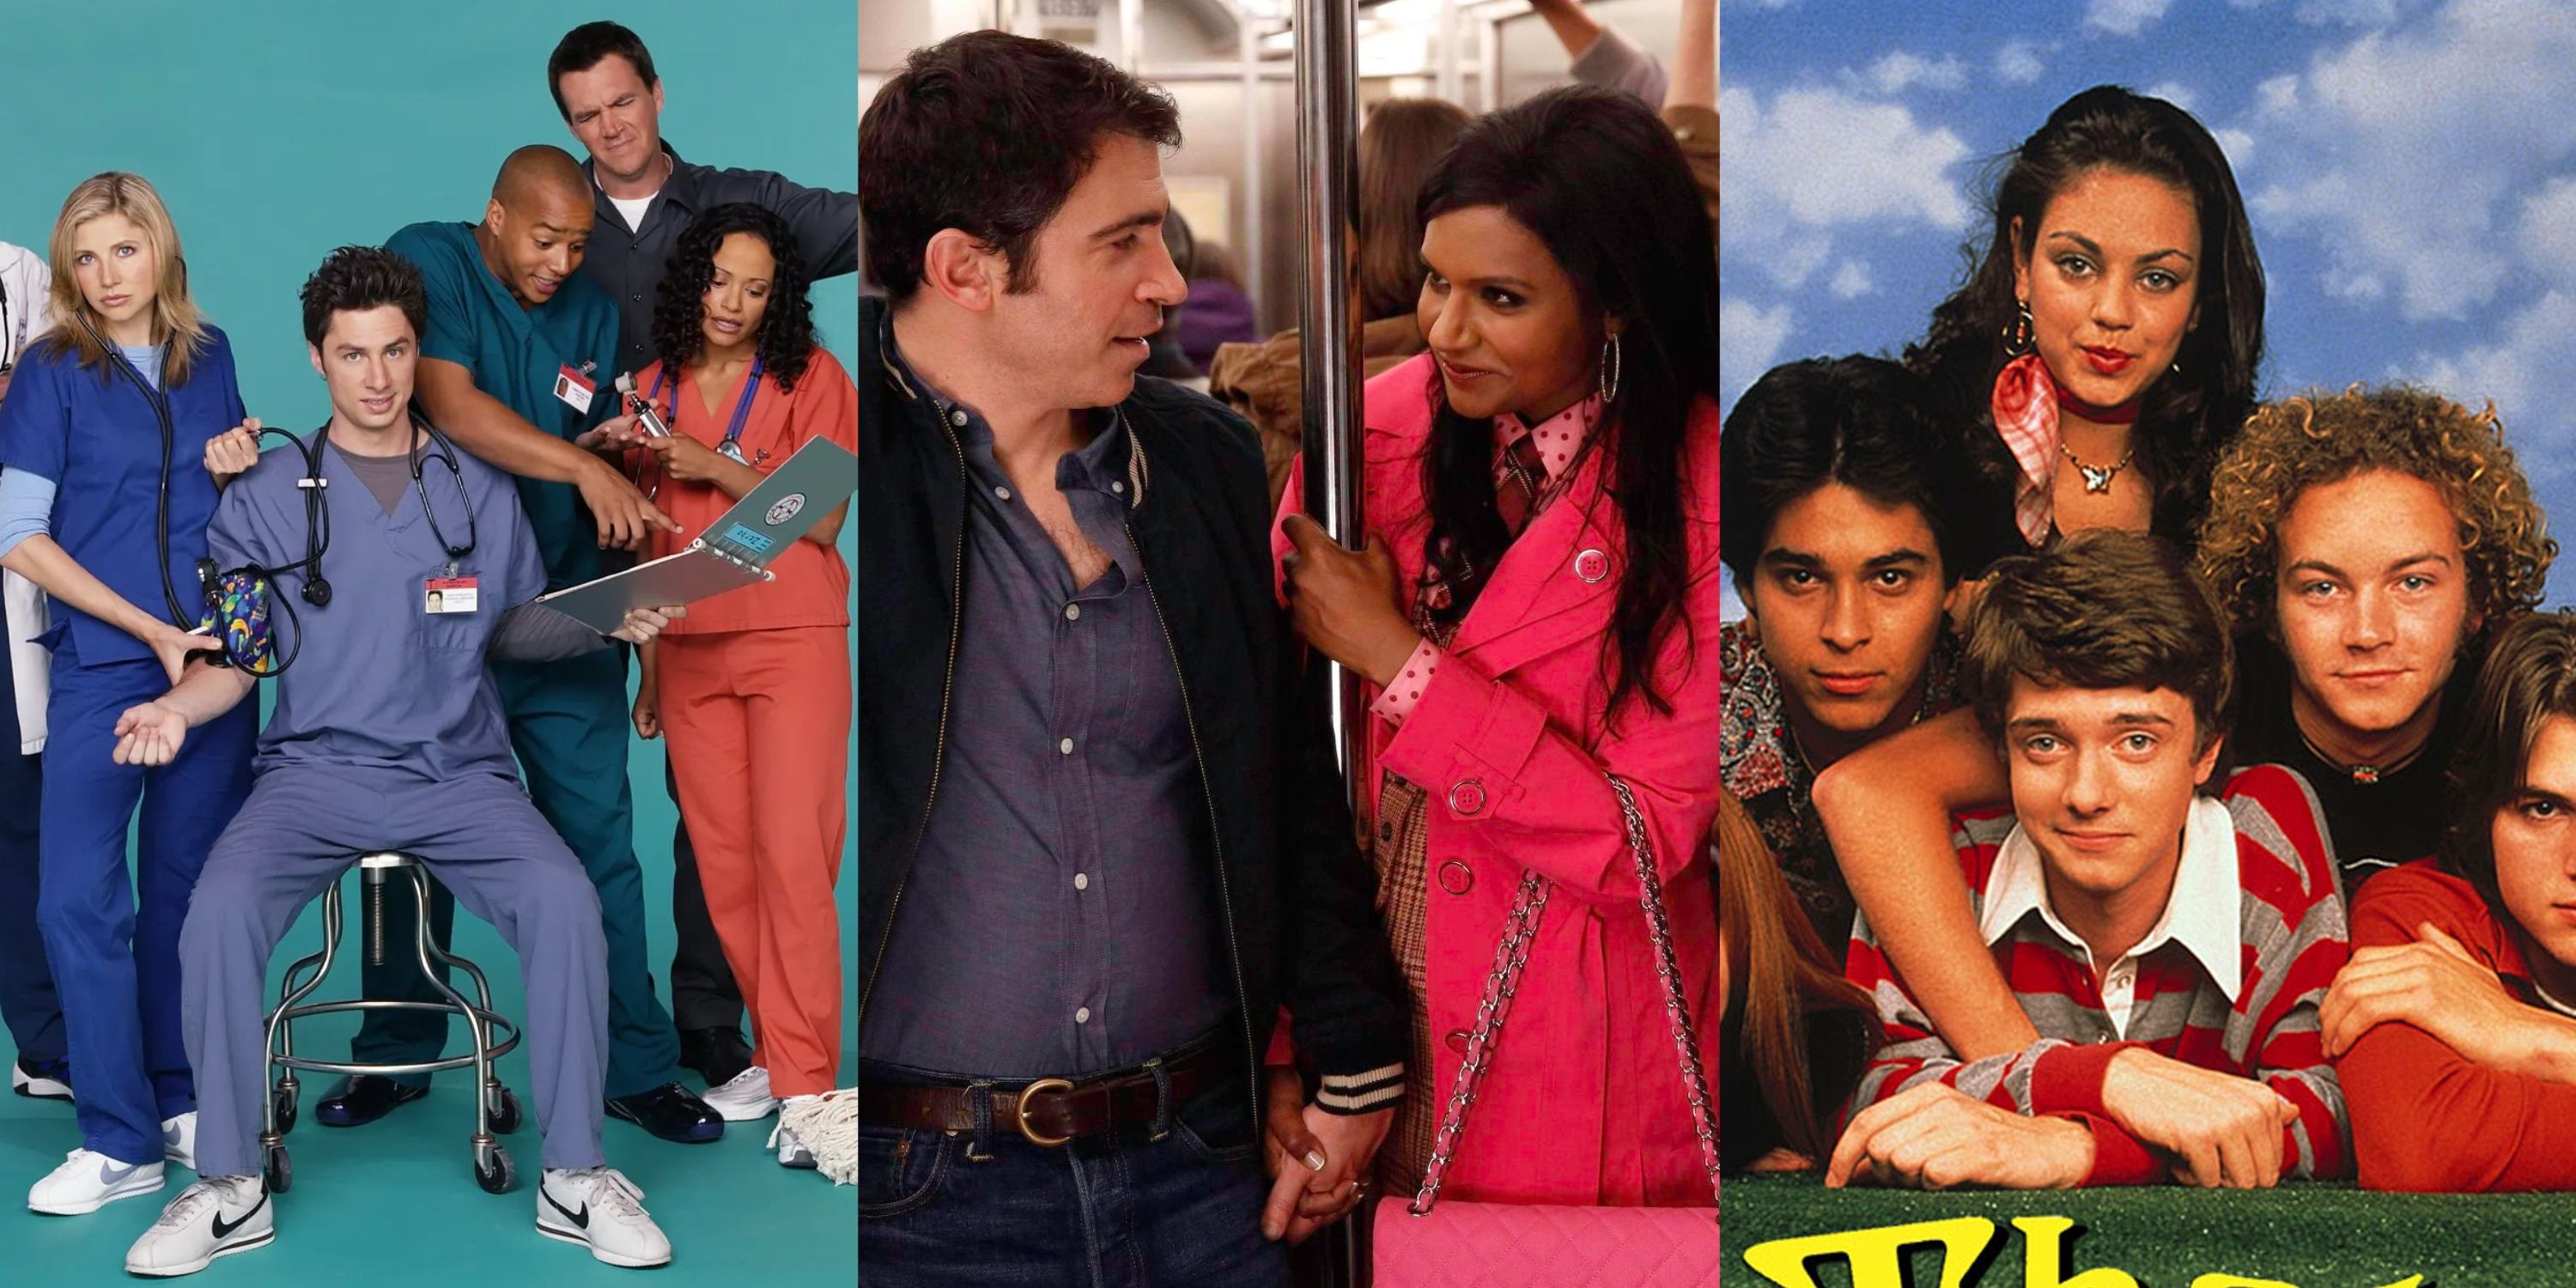 The cast of Scrubs, Danny and Mindy in The Mindy Project, the cast of That 70s show